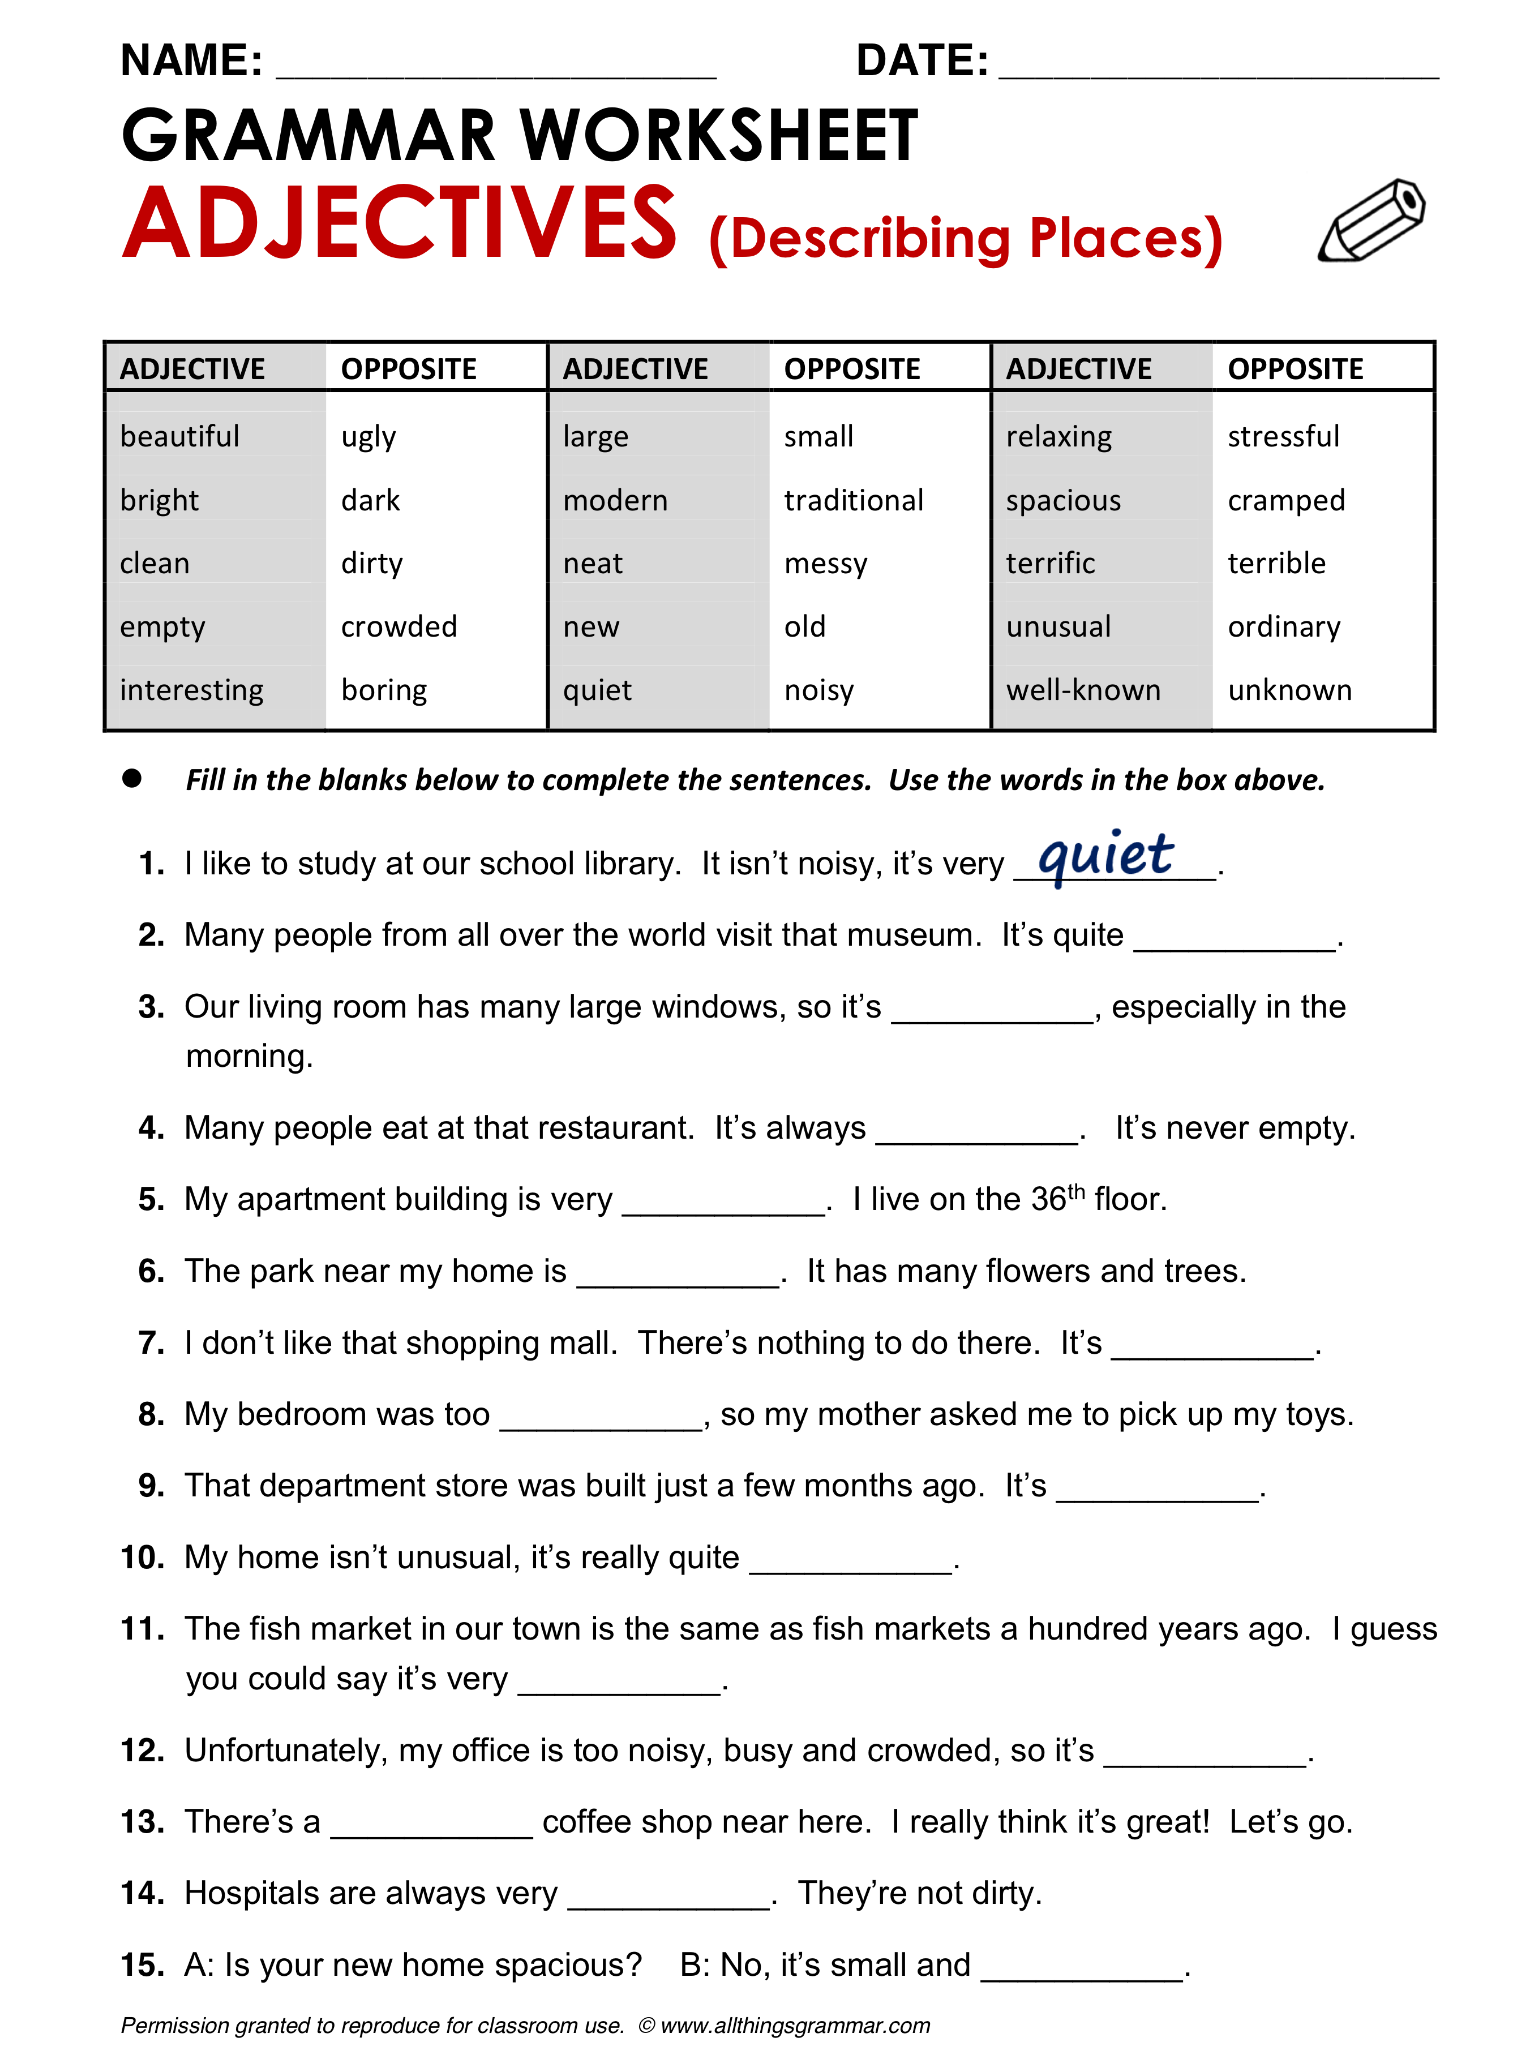 adjectives-for-places-worksheets-adjectiveworksheets